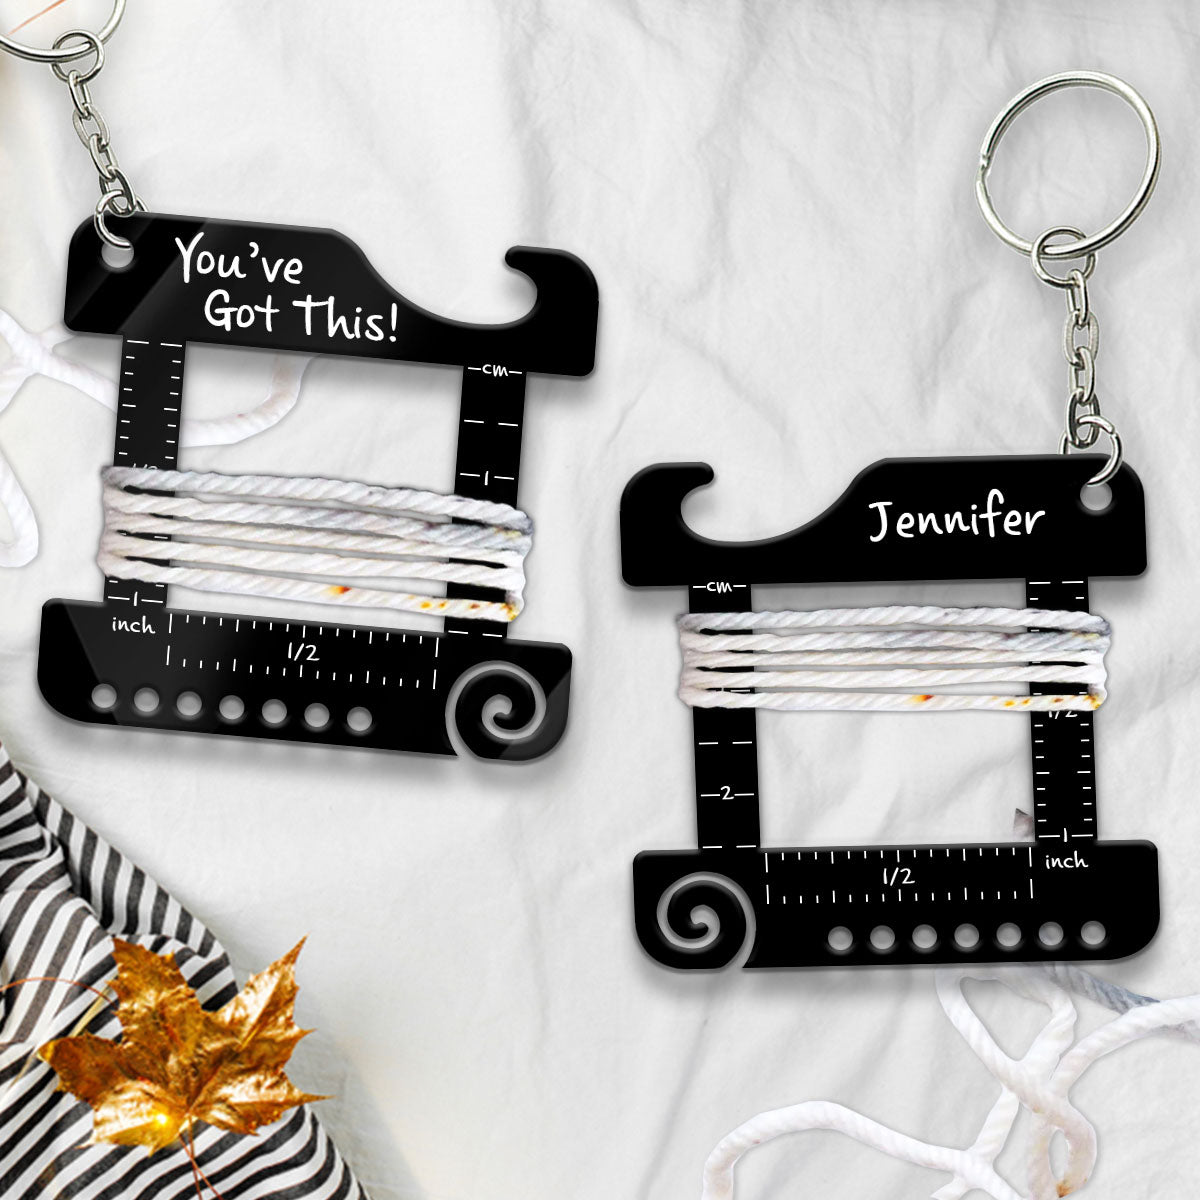 You’ve Got This! - Personalized Knitting Keychain